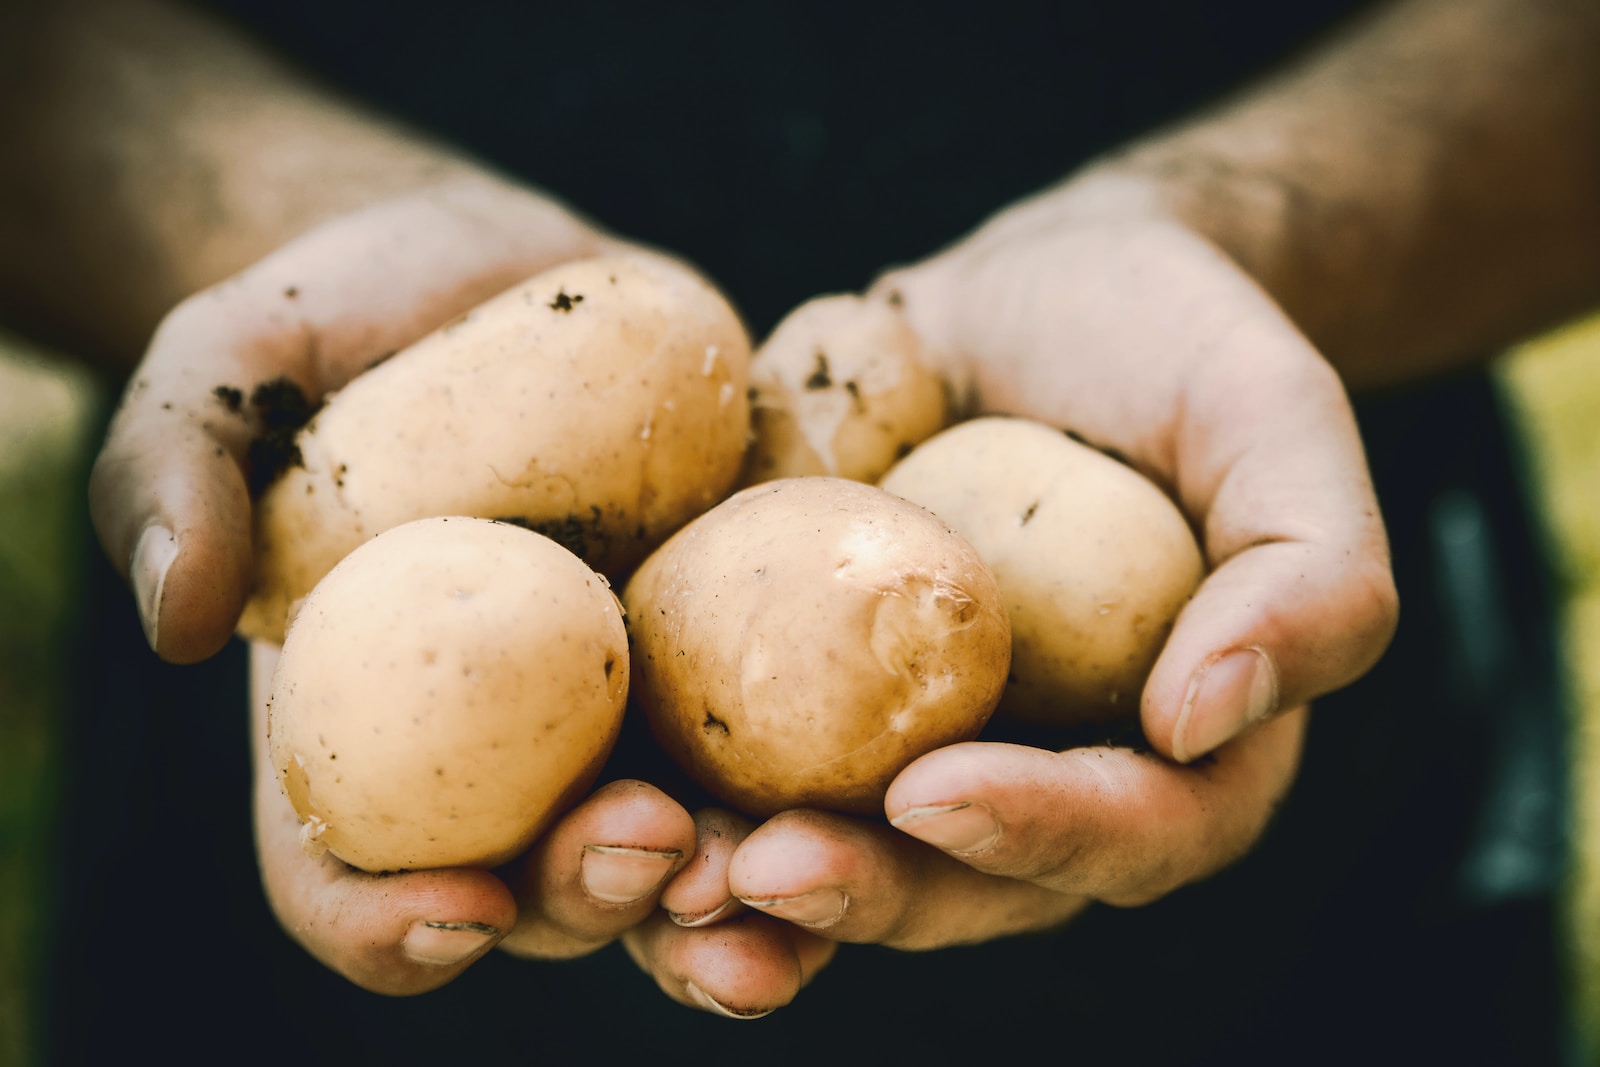 Planting and Growing Potatoes in Alabama